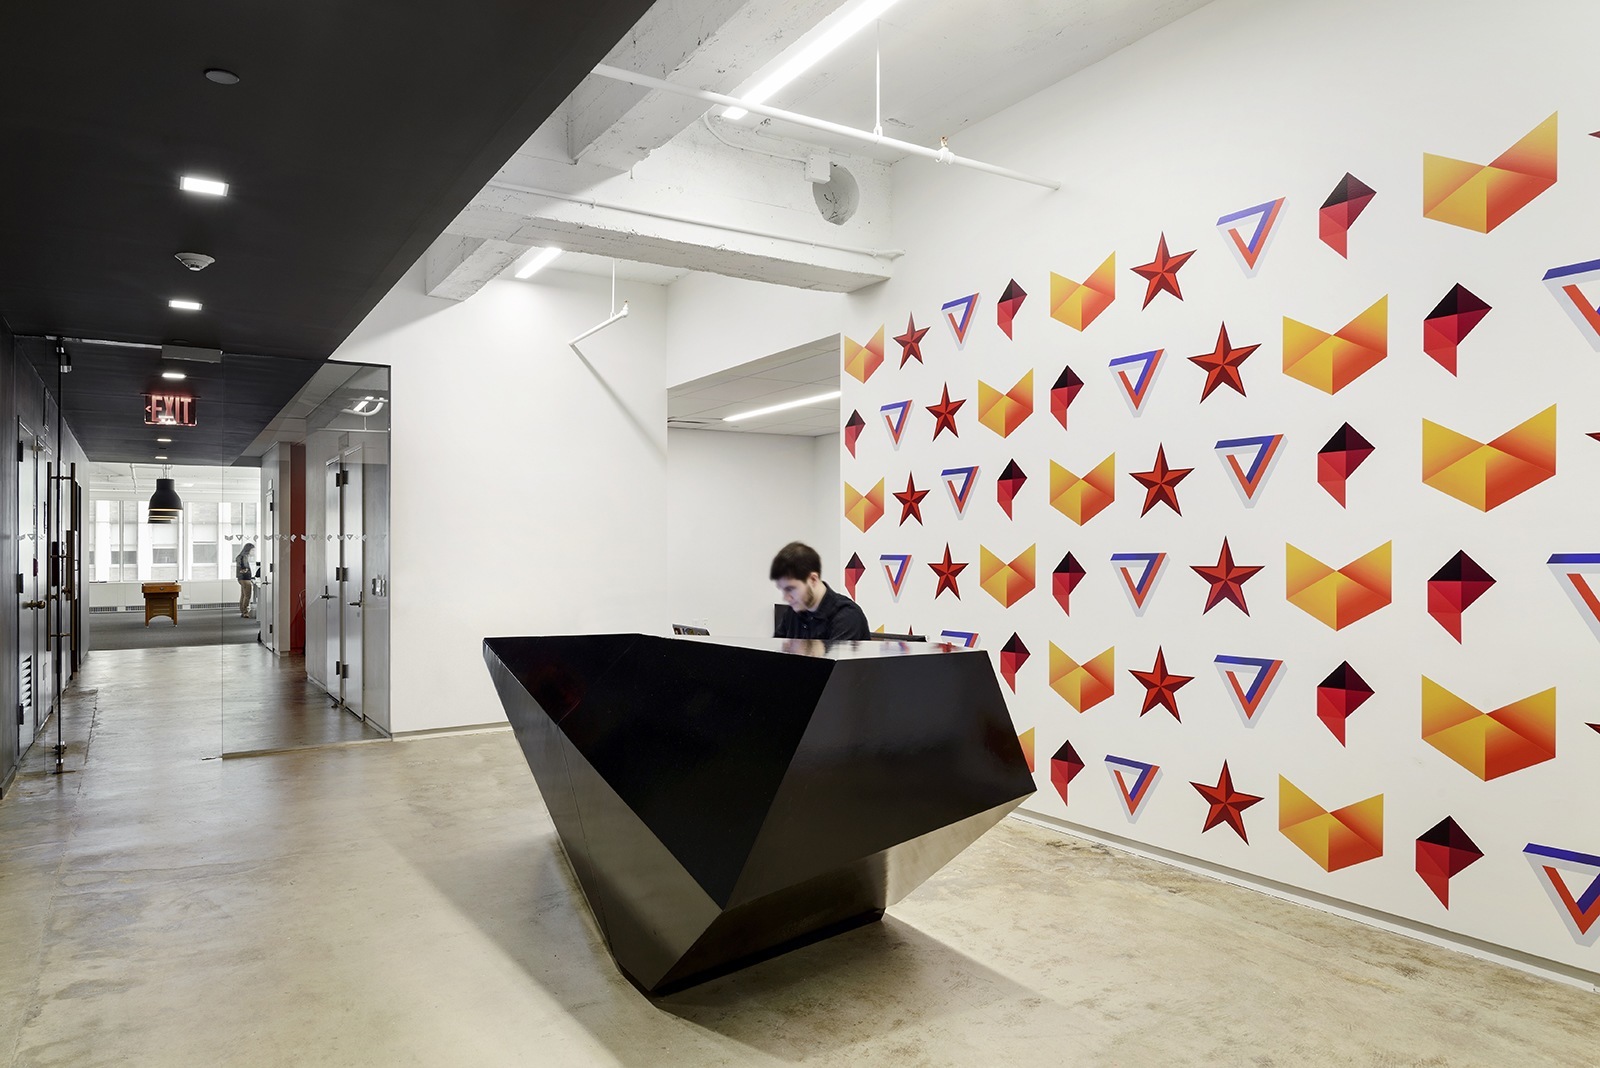 A Look Inside Booking.com's Eclectic NYC Office - Officelovin